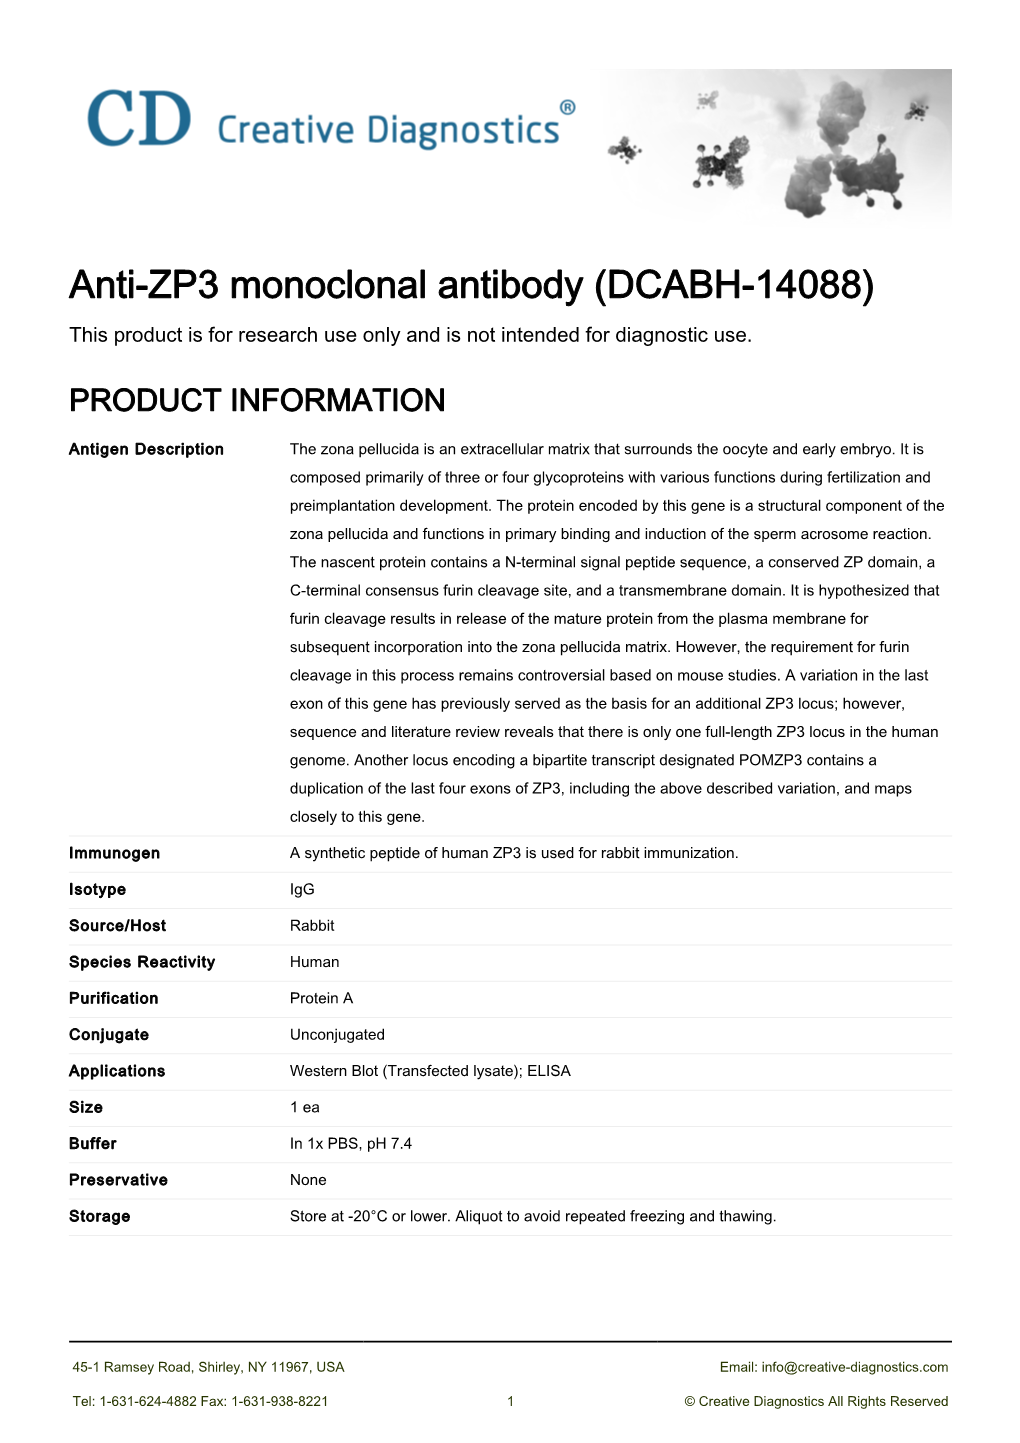 Anti-ZP3 Monoclonal Antibody (DCABH-14088) This Product Is for Research Use Only and Is Not Intended for Diagnostic Use